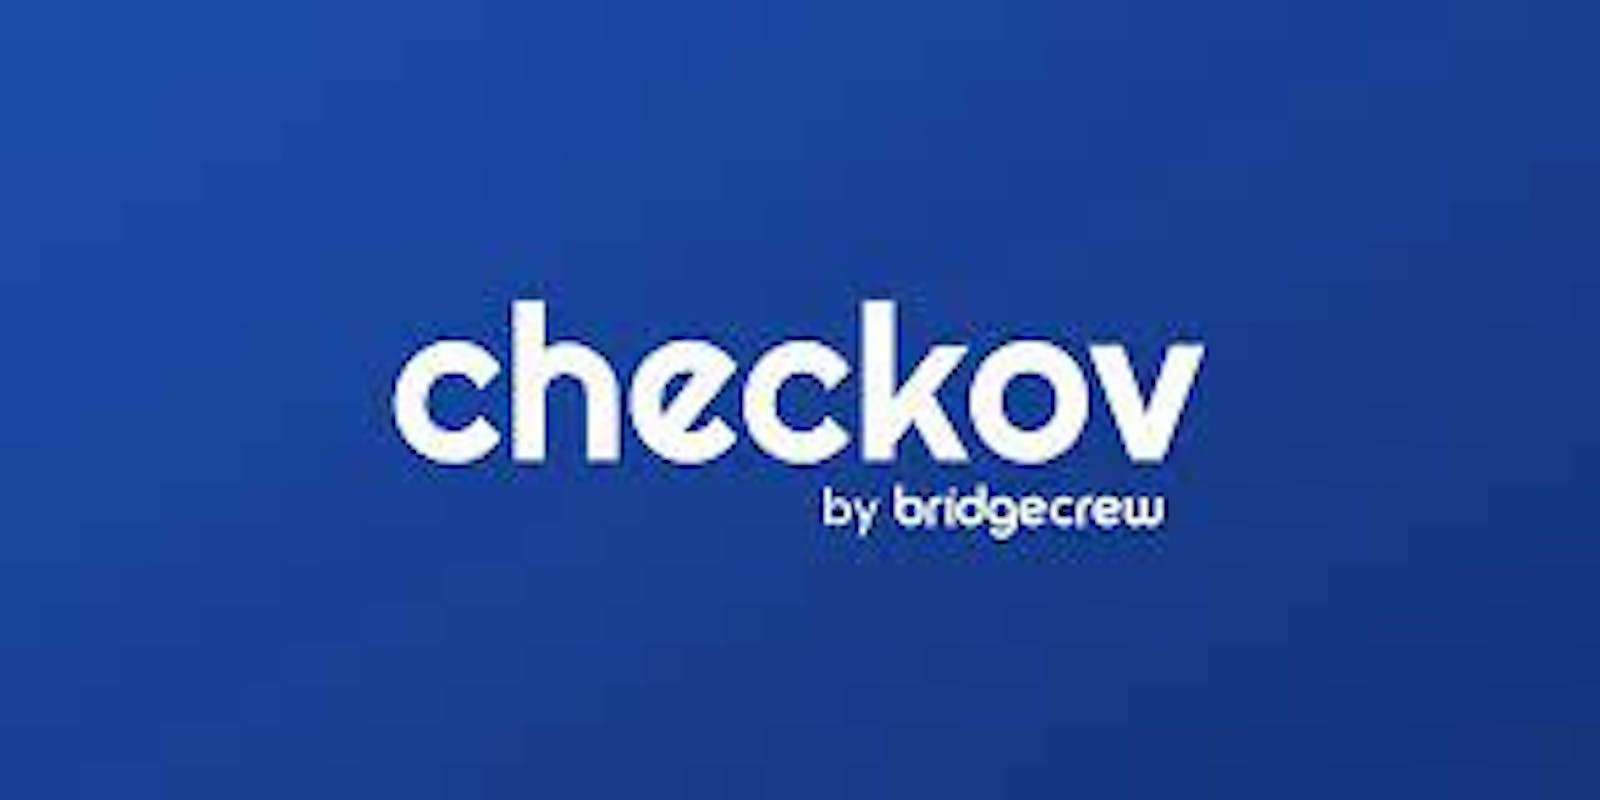 Testing infrastructure configurations with Checkov